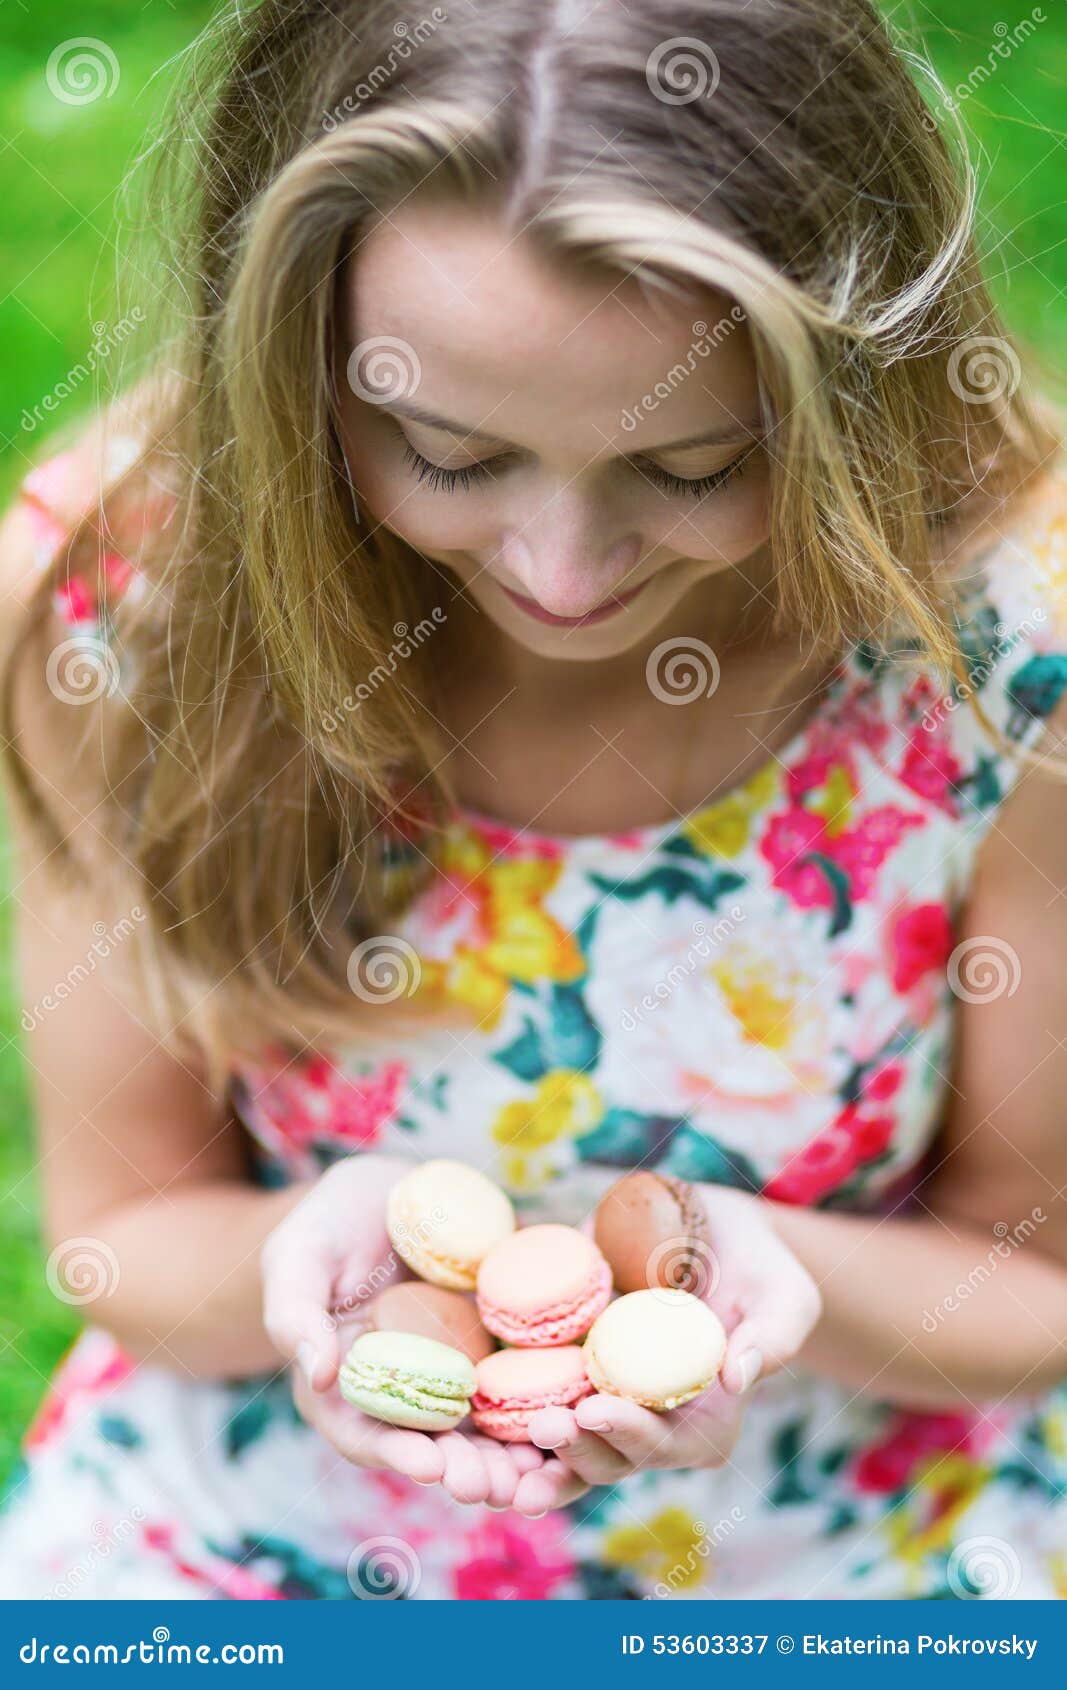 Girl Holding French Macaroons In Hands Stock Image Image Of Human Nature 53603337